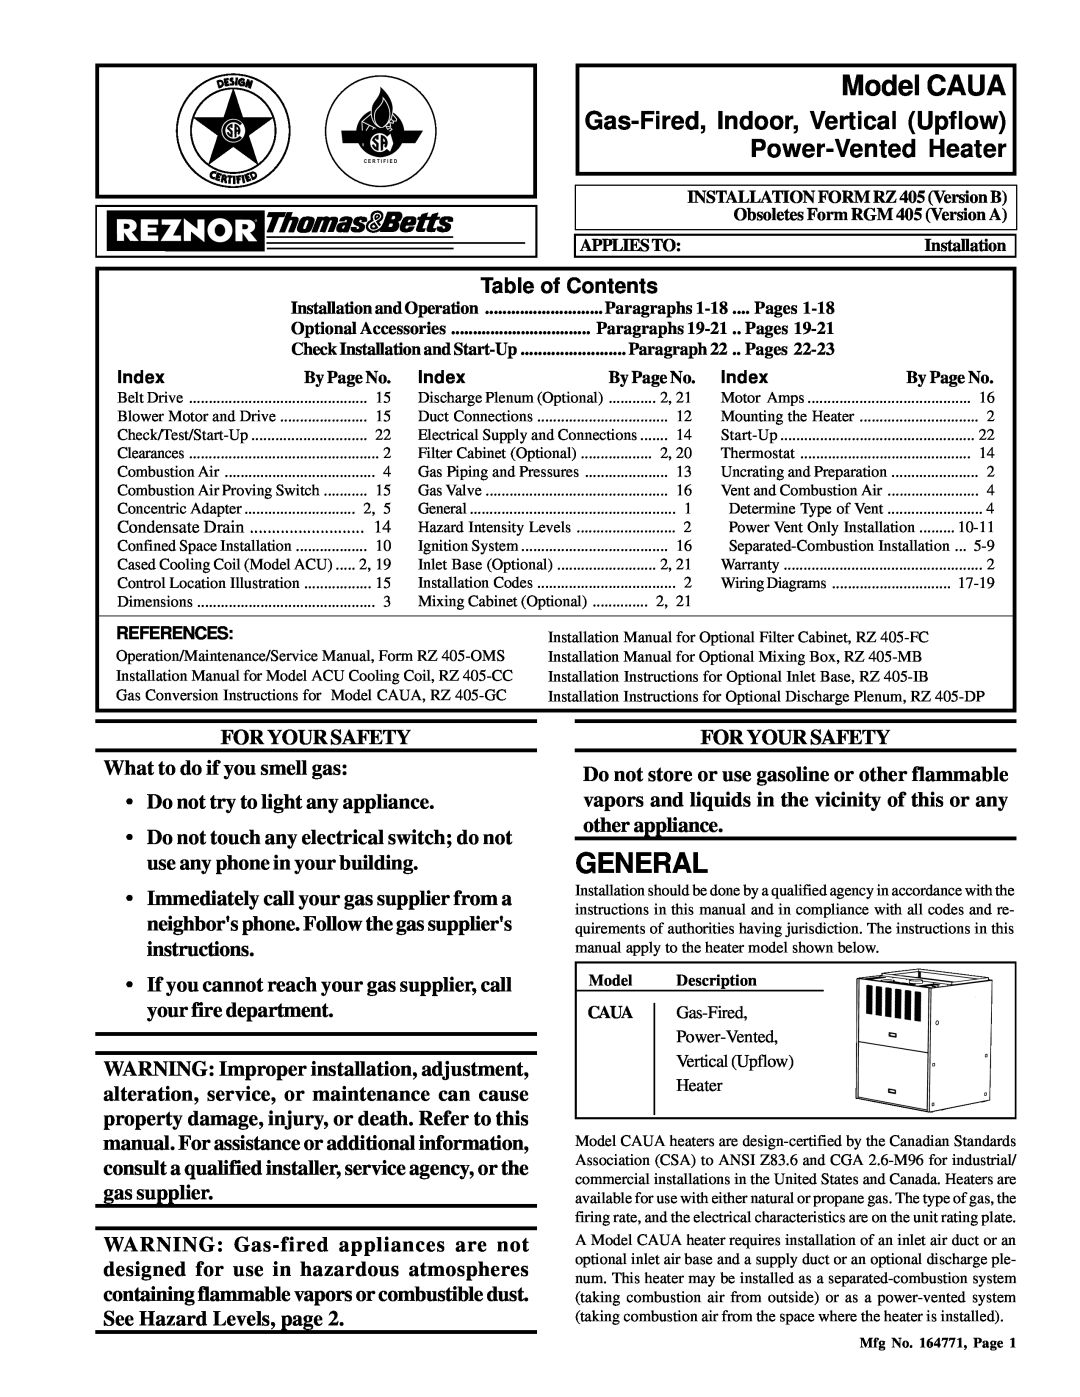 Thomas & Betts RZ405, RGM 405 dimensions Model CAUA, General, Table of Contents 